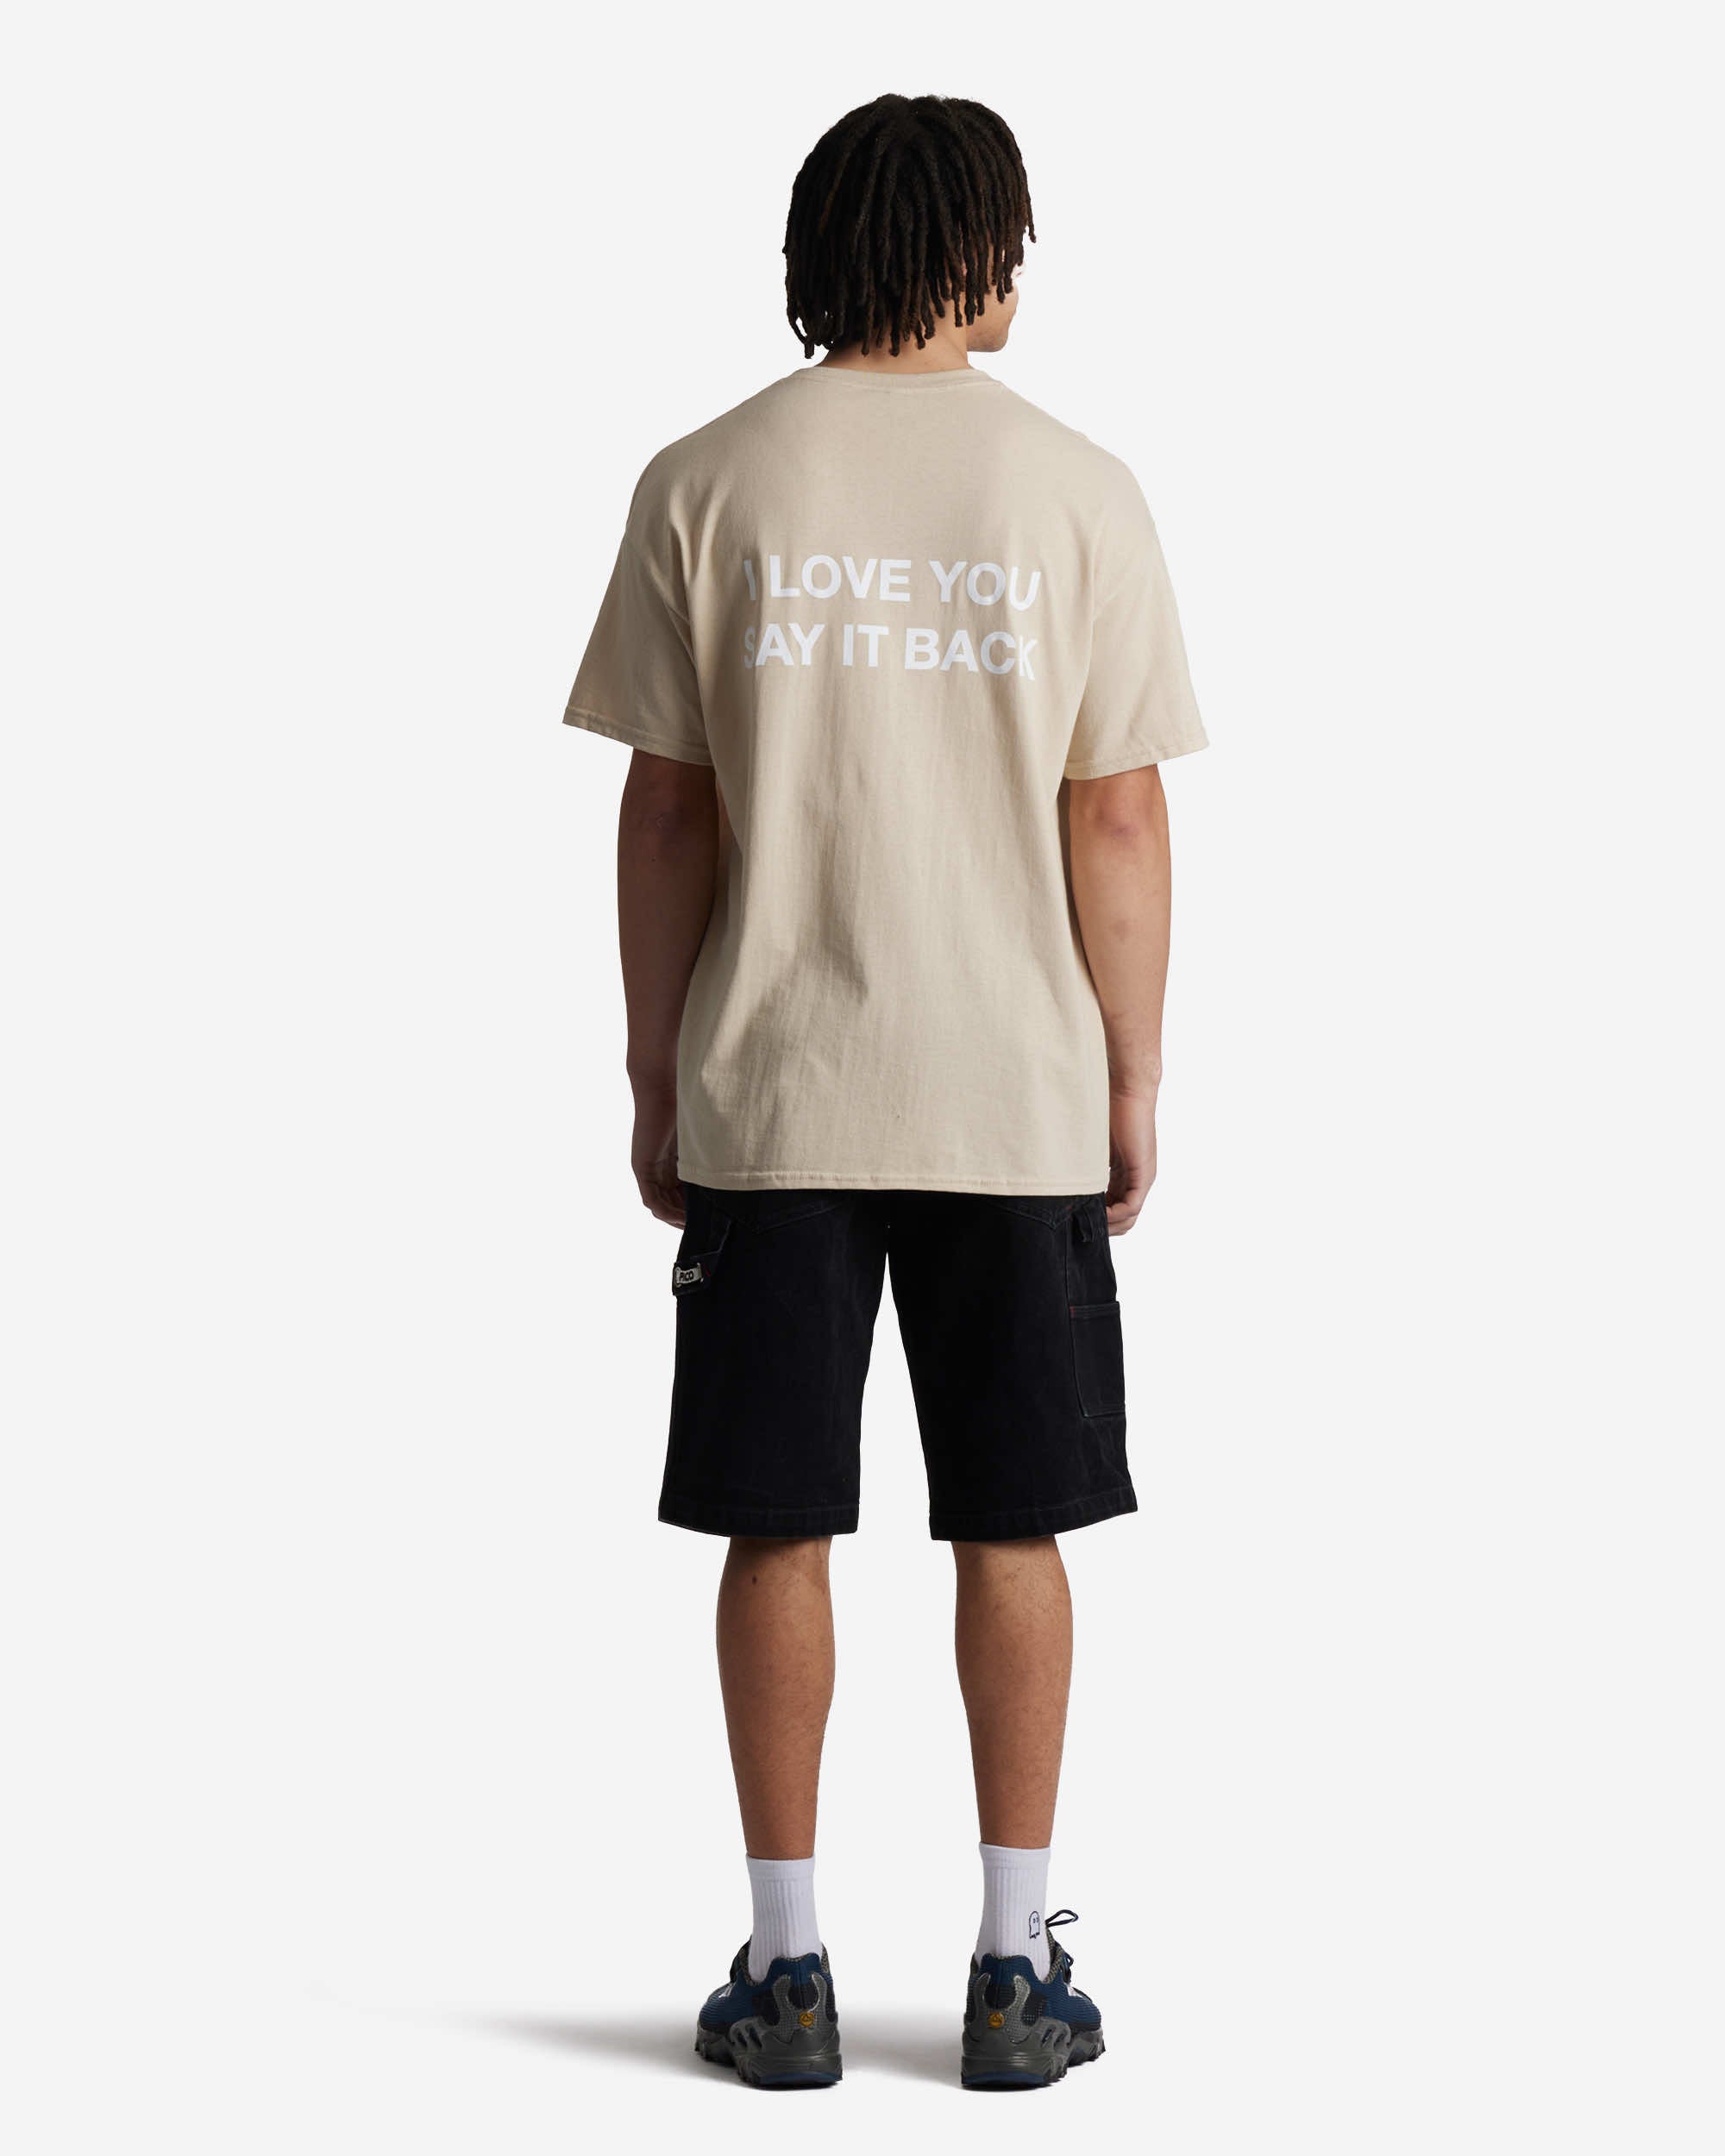 Daily's I Love You Say It Back Tee